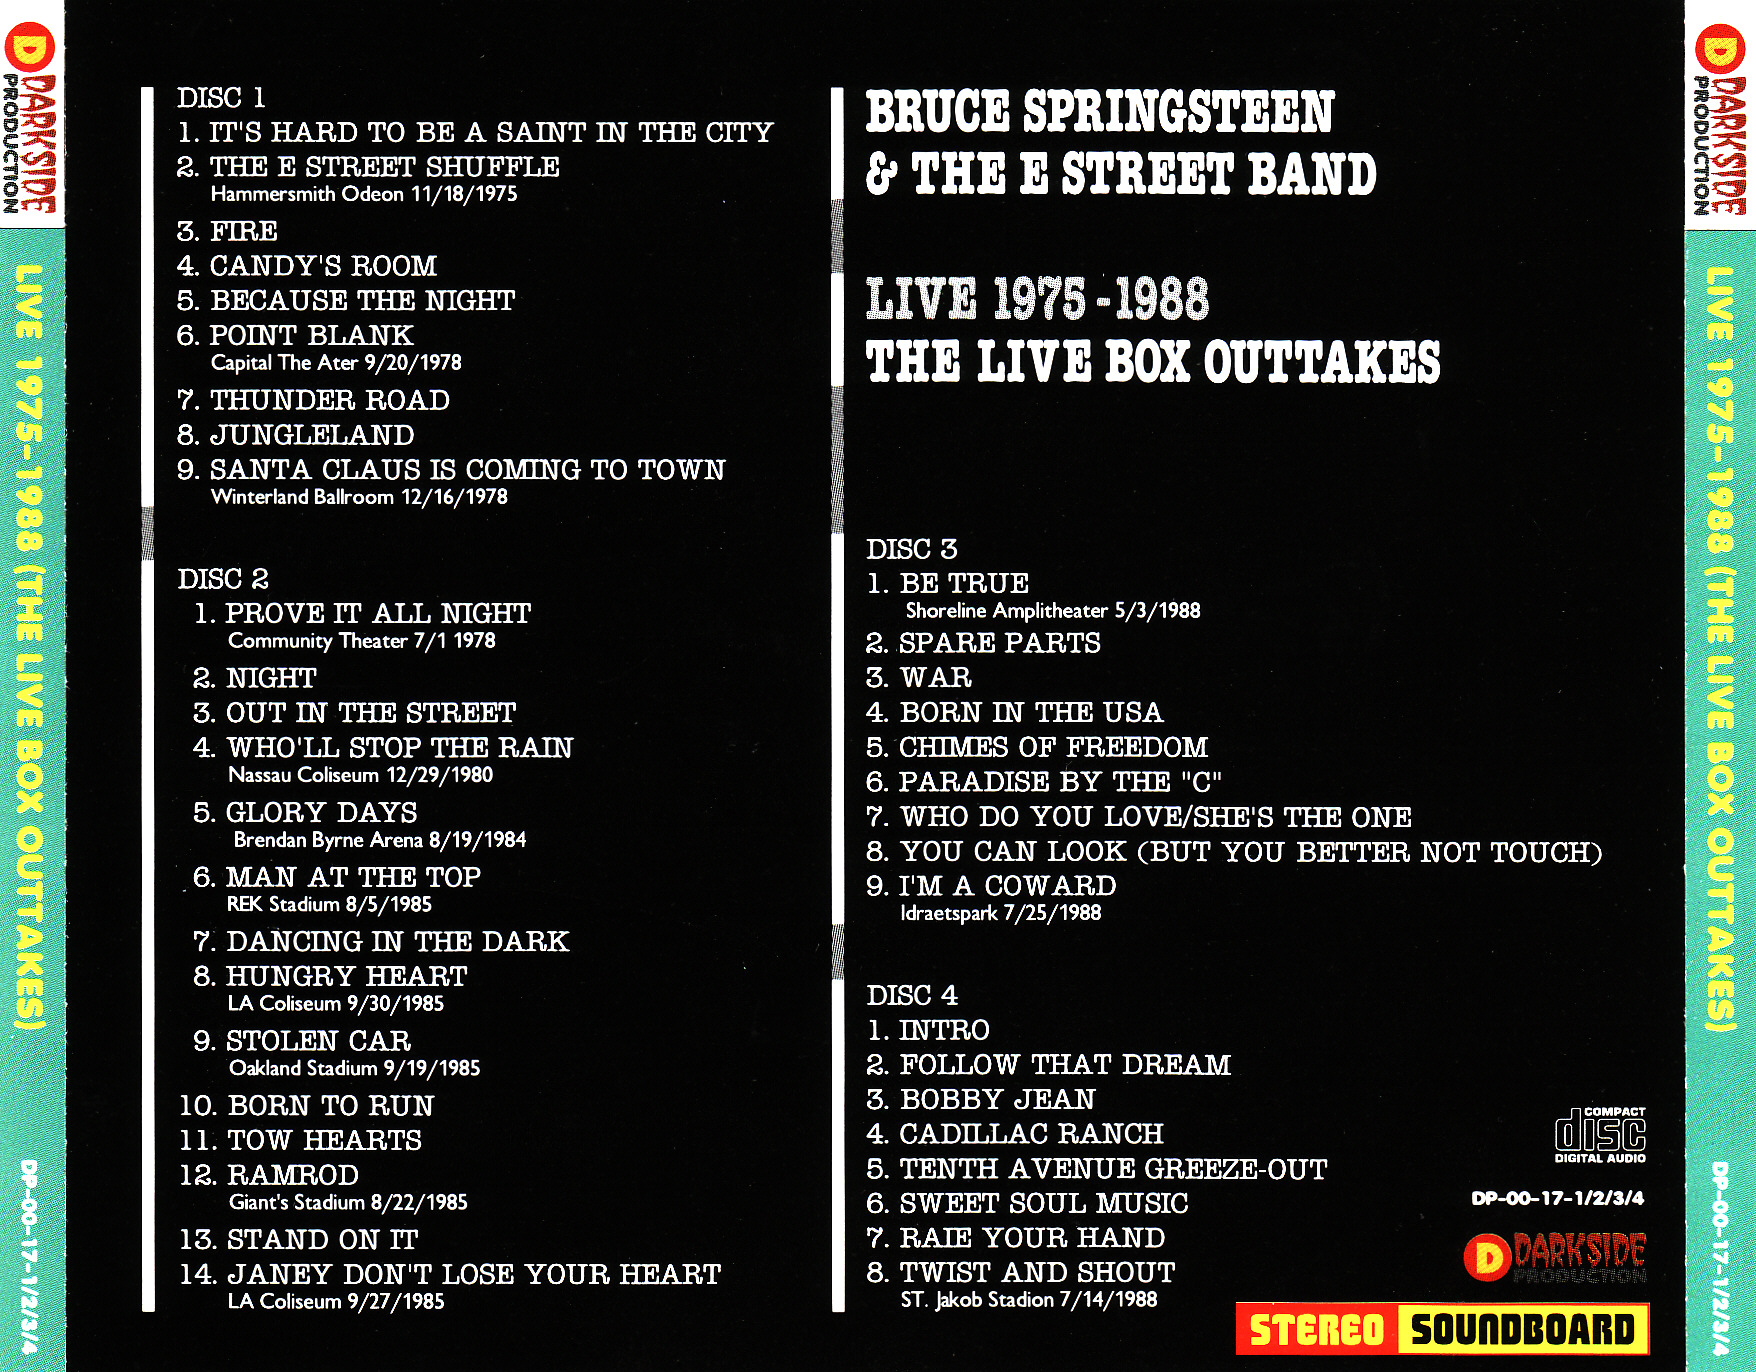 BruceSpringsteenAndTheEStreetBand1975-1988TheLiveBoxOuttakes (2).jpg